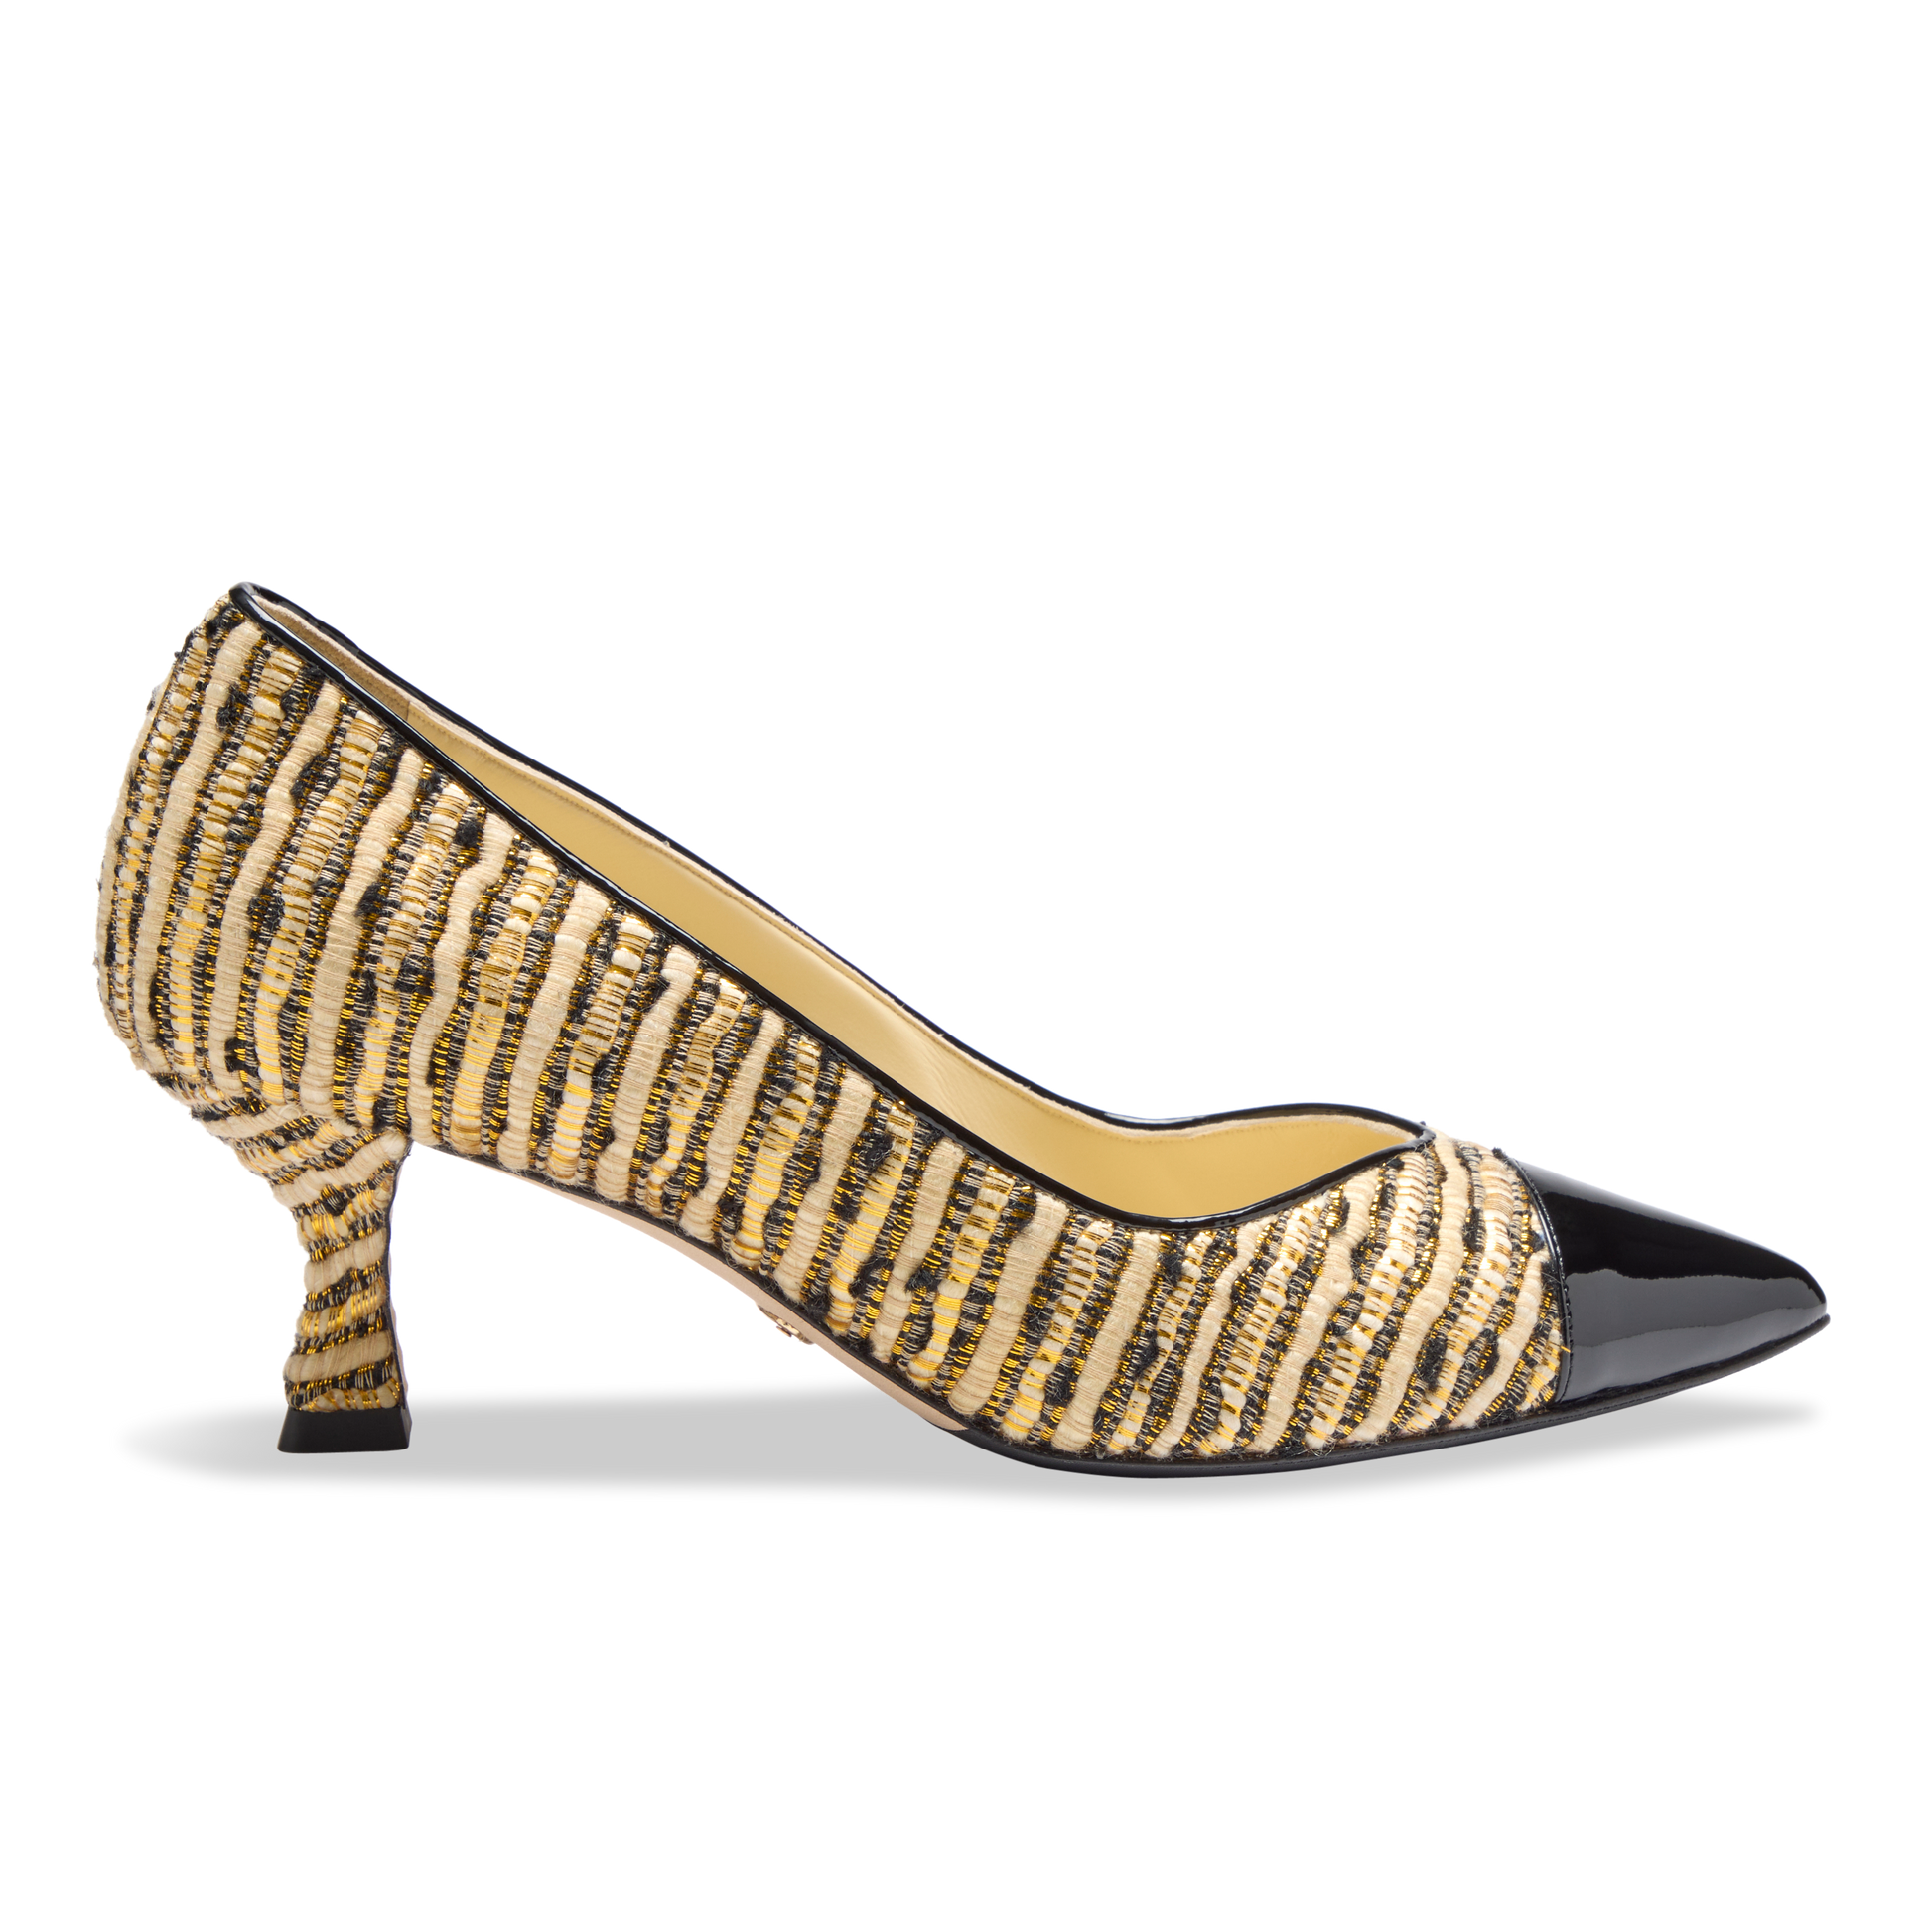 Perfect Kitten Pump 50 in Black and Gold Boucle